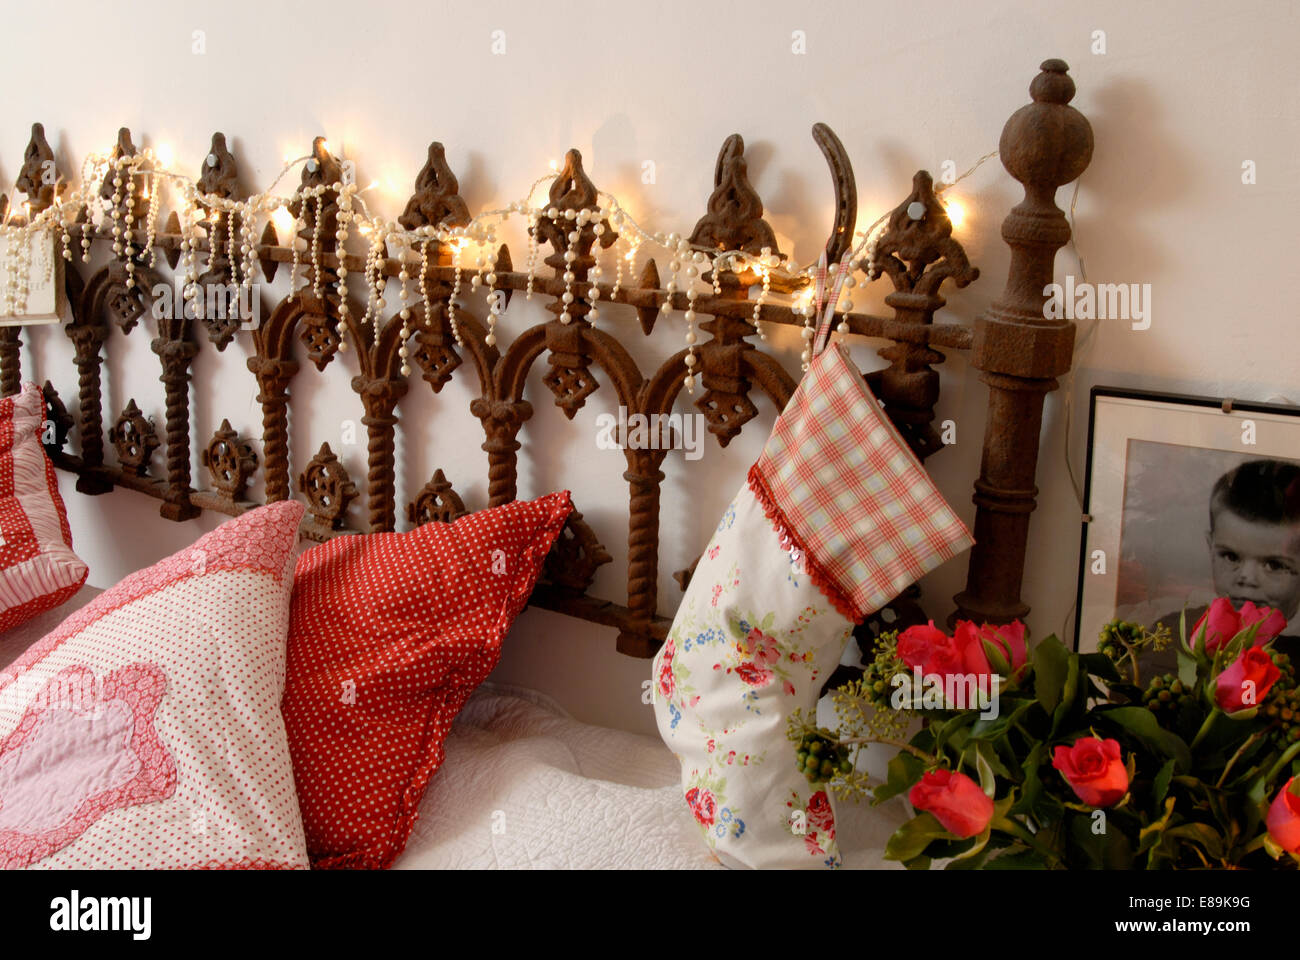 Close-up of cushions and cotton Christmas stocking bed with Gothic-style headboard and Christmas lights Stock Photo